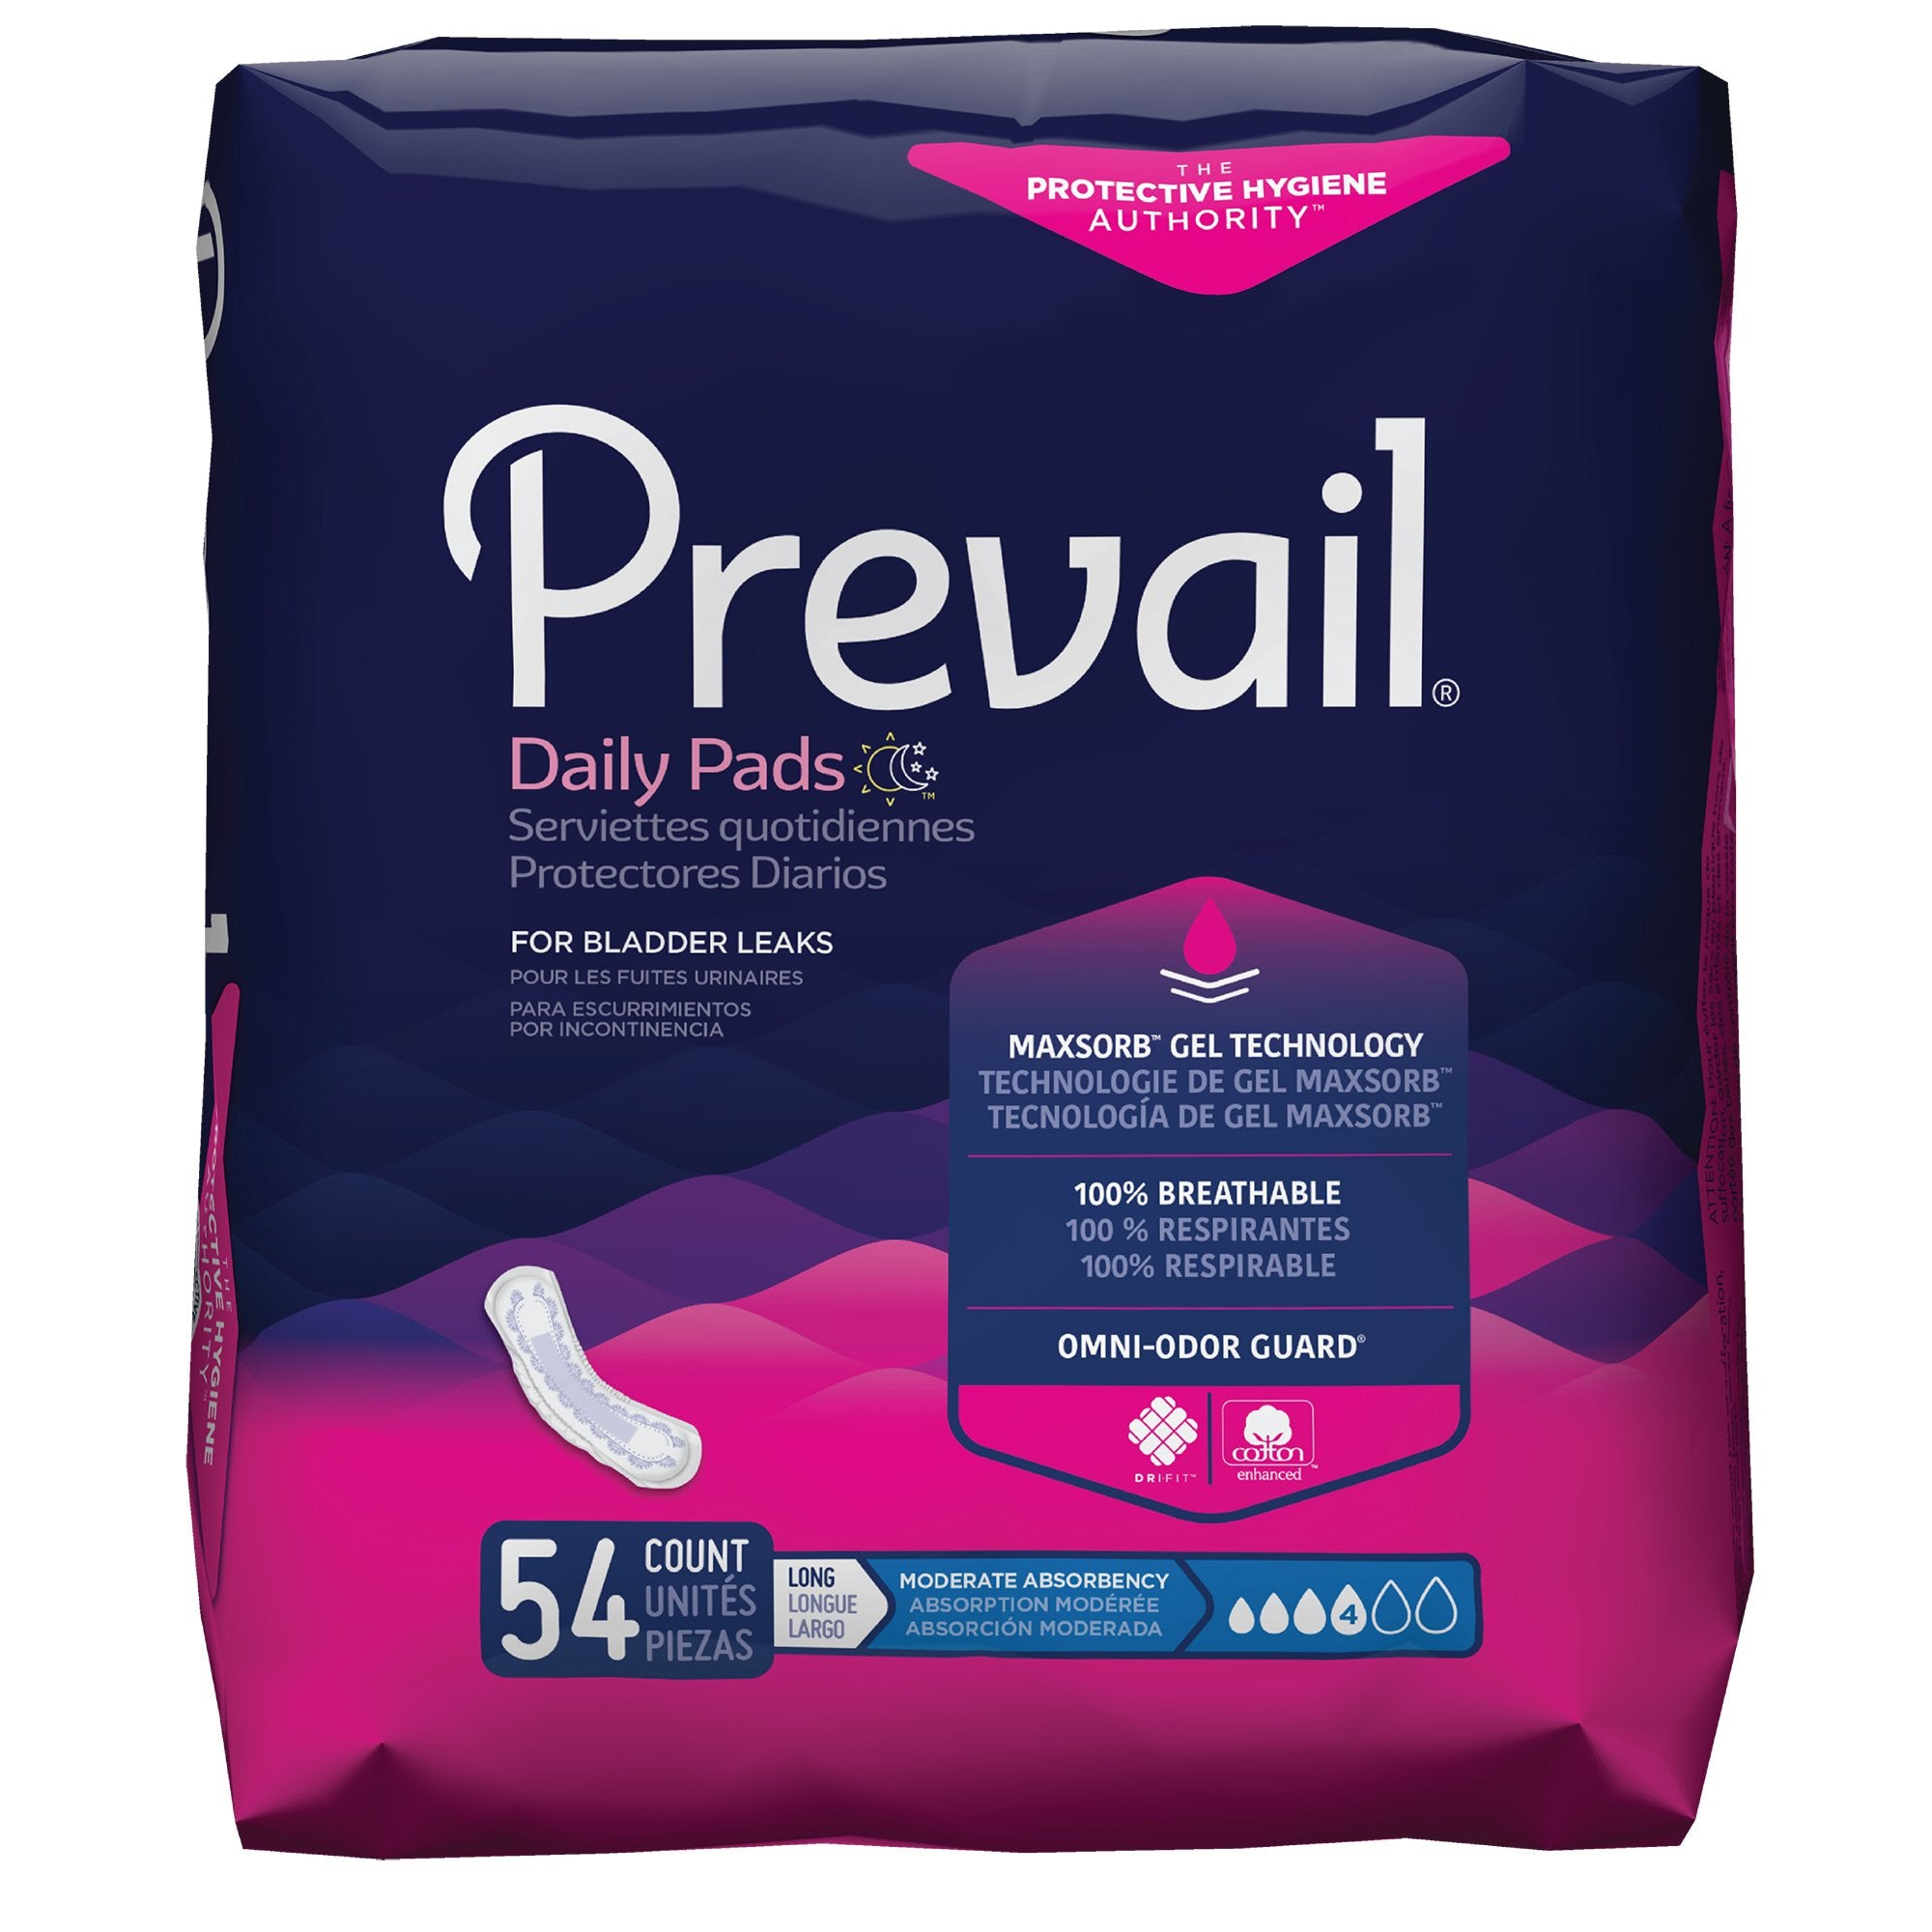 Bladder Control Pad Prevail® Daily Pads 11 Inch Length Moderate Absorbency Polymer Core One Size Fits Most